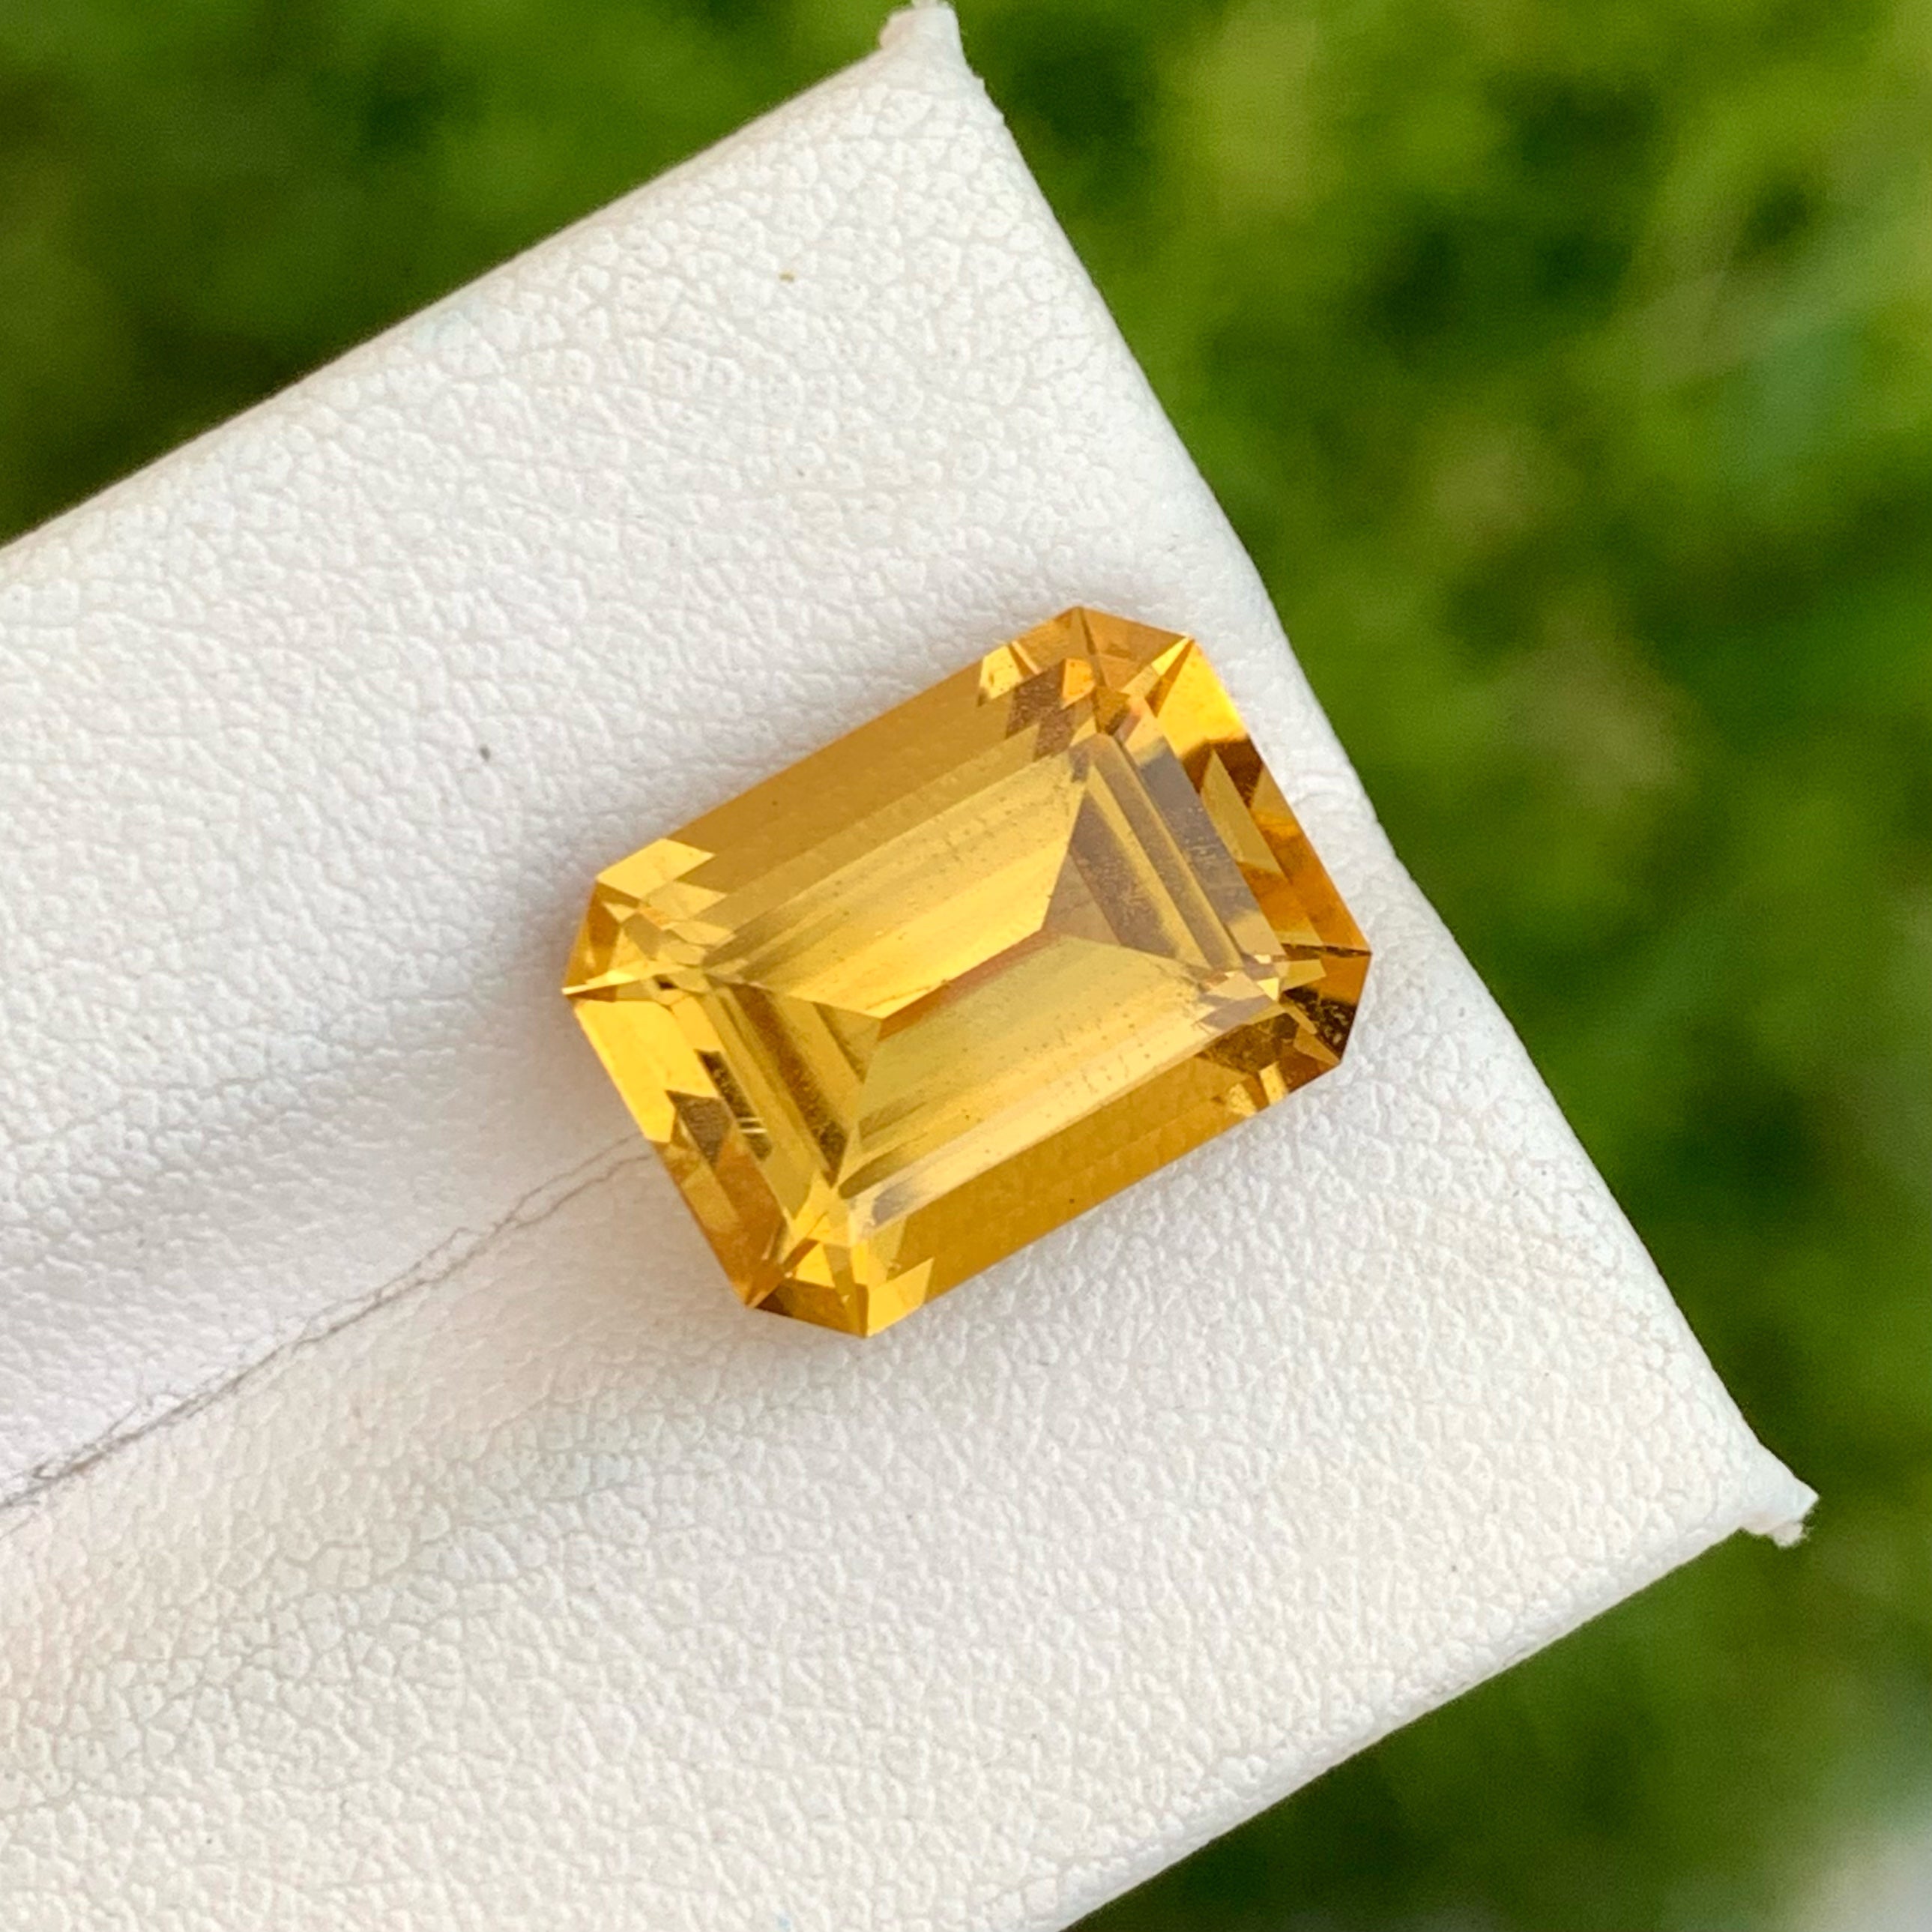 Golden Heliodor 7.20 carats Loose Gemstone from Brazil